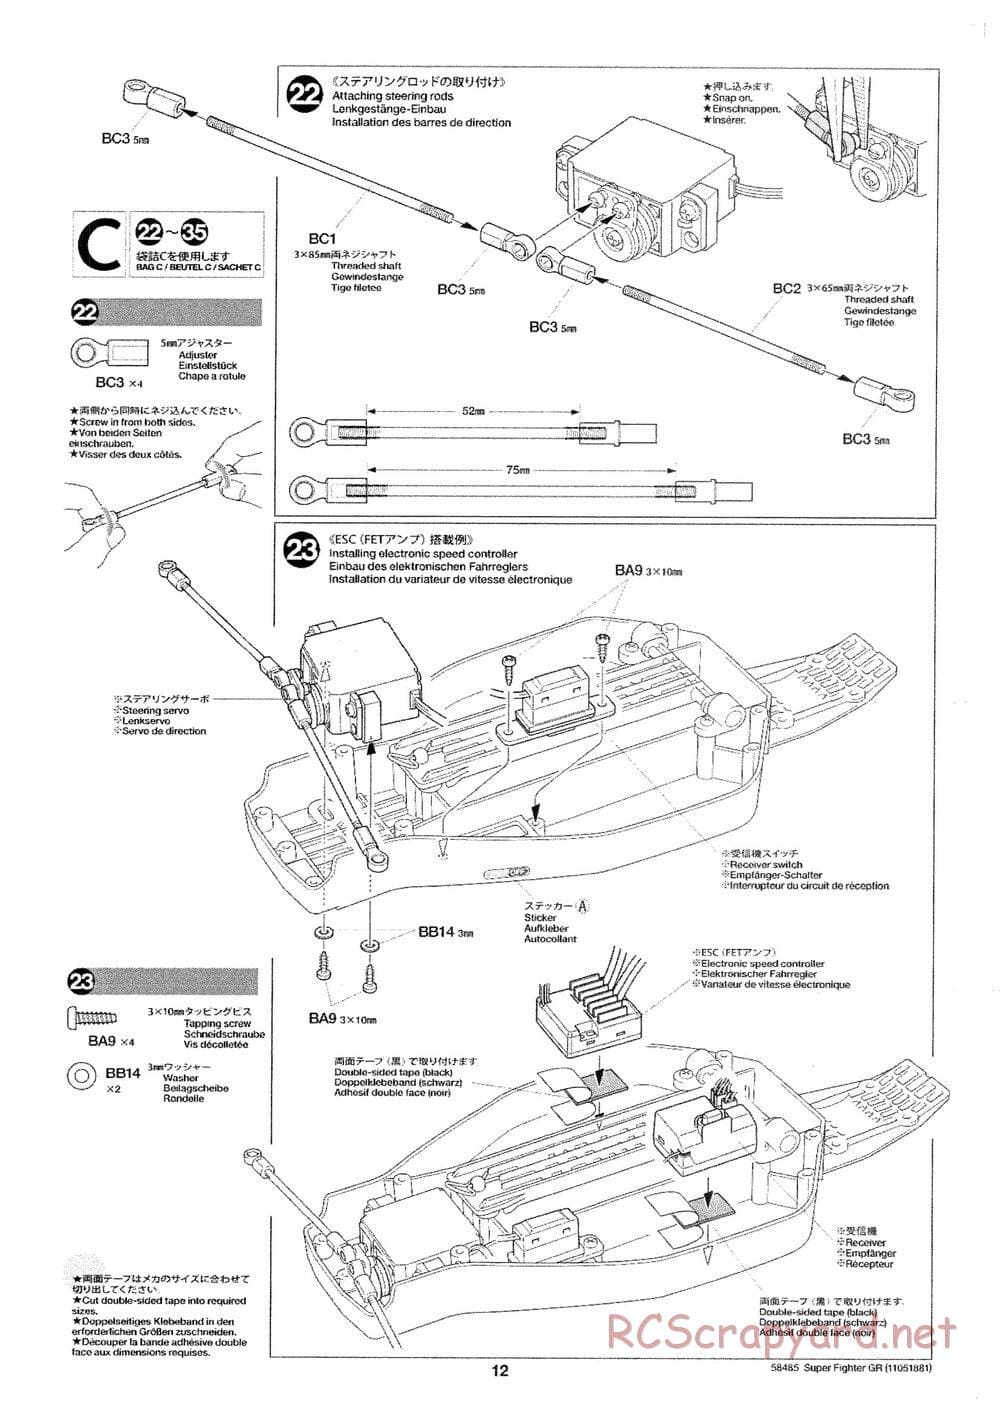 Tamiya - Super Fighter GR - DT-02 Chassis - Manual - Page 12